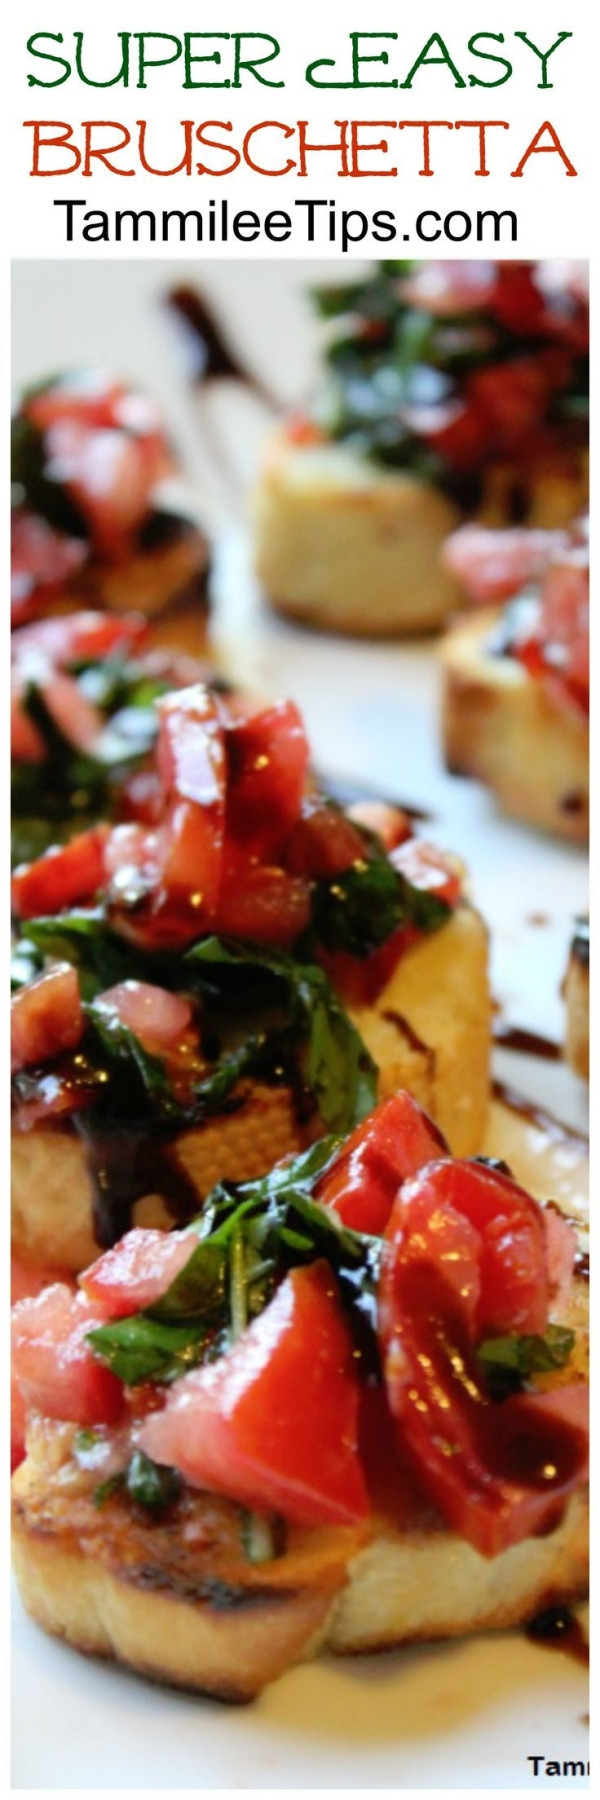 Good Thanksgiving Appetizers
 Super easy Bruschetta recipe This is the perfect